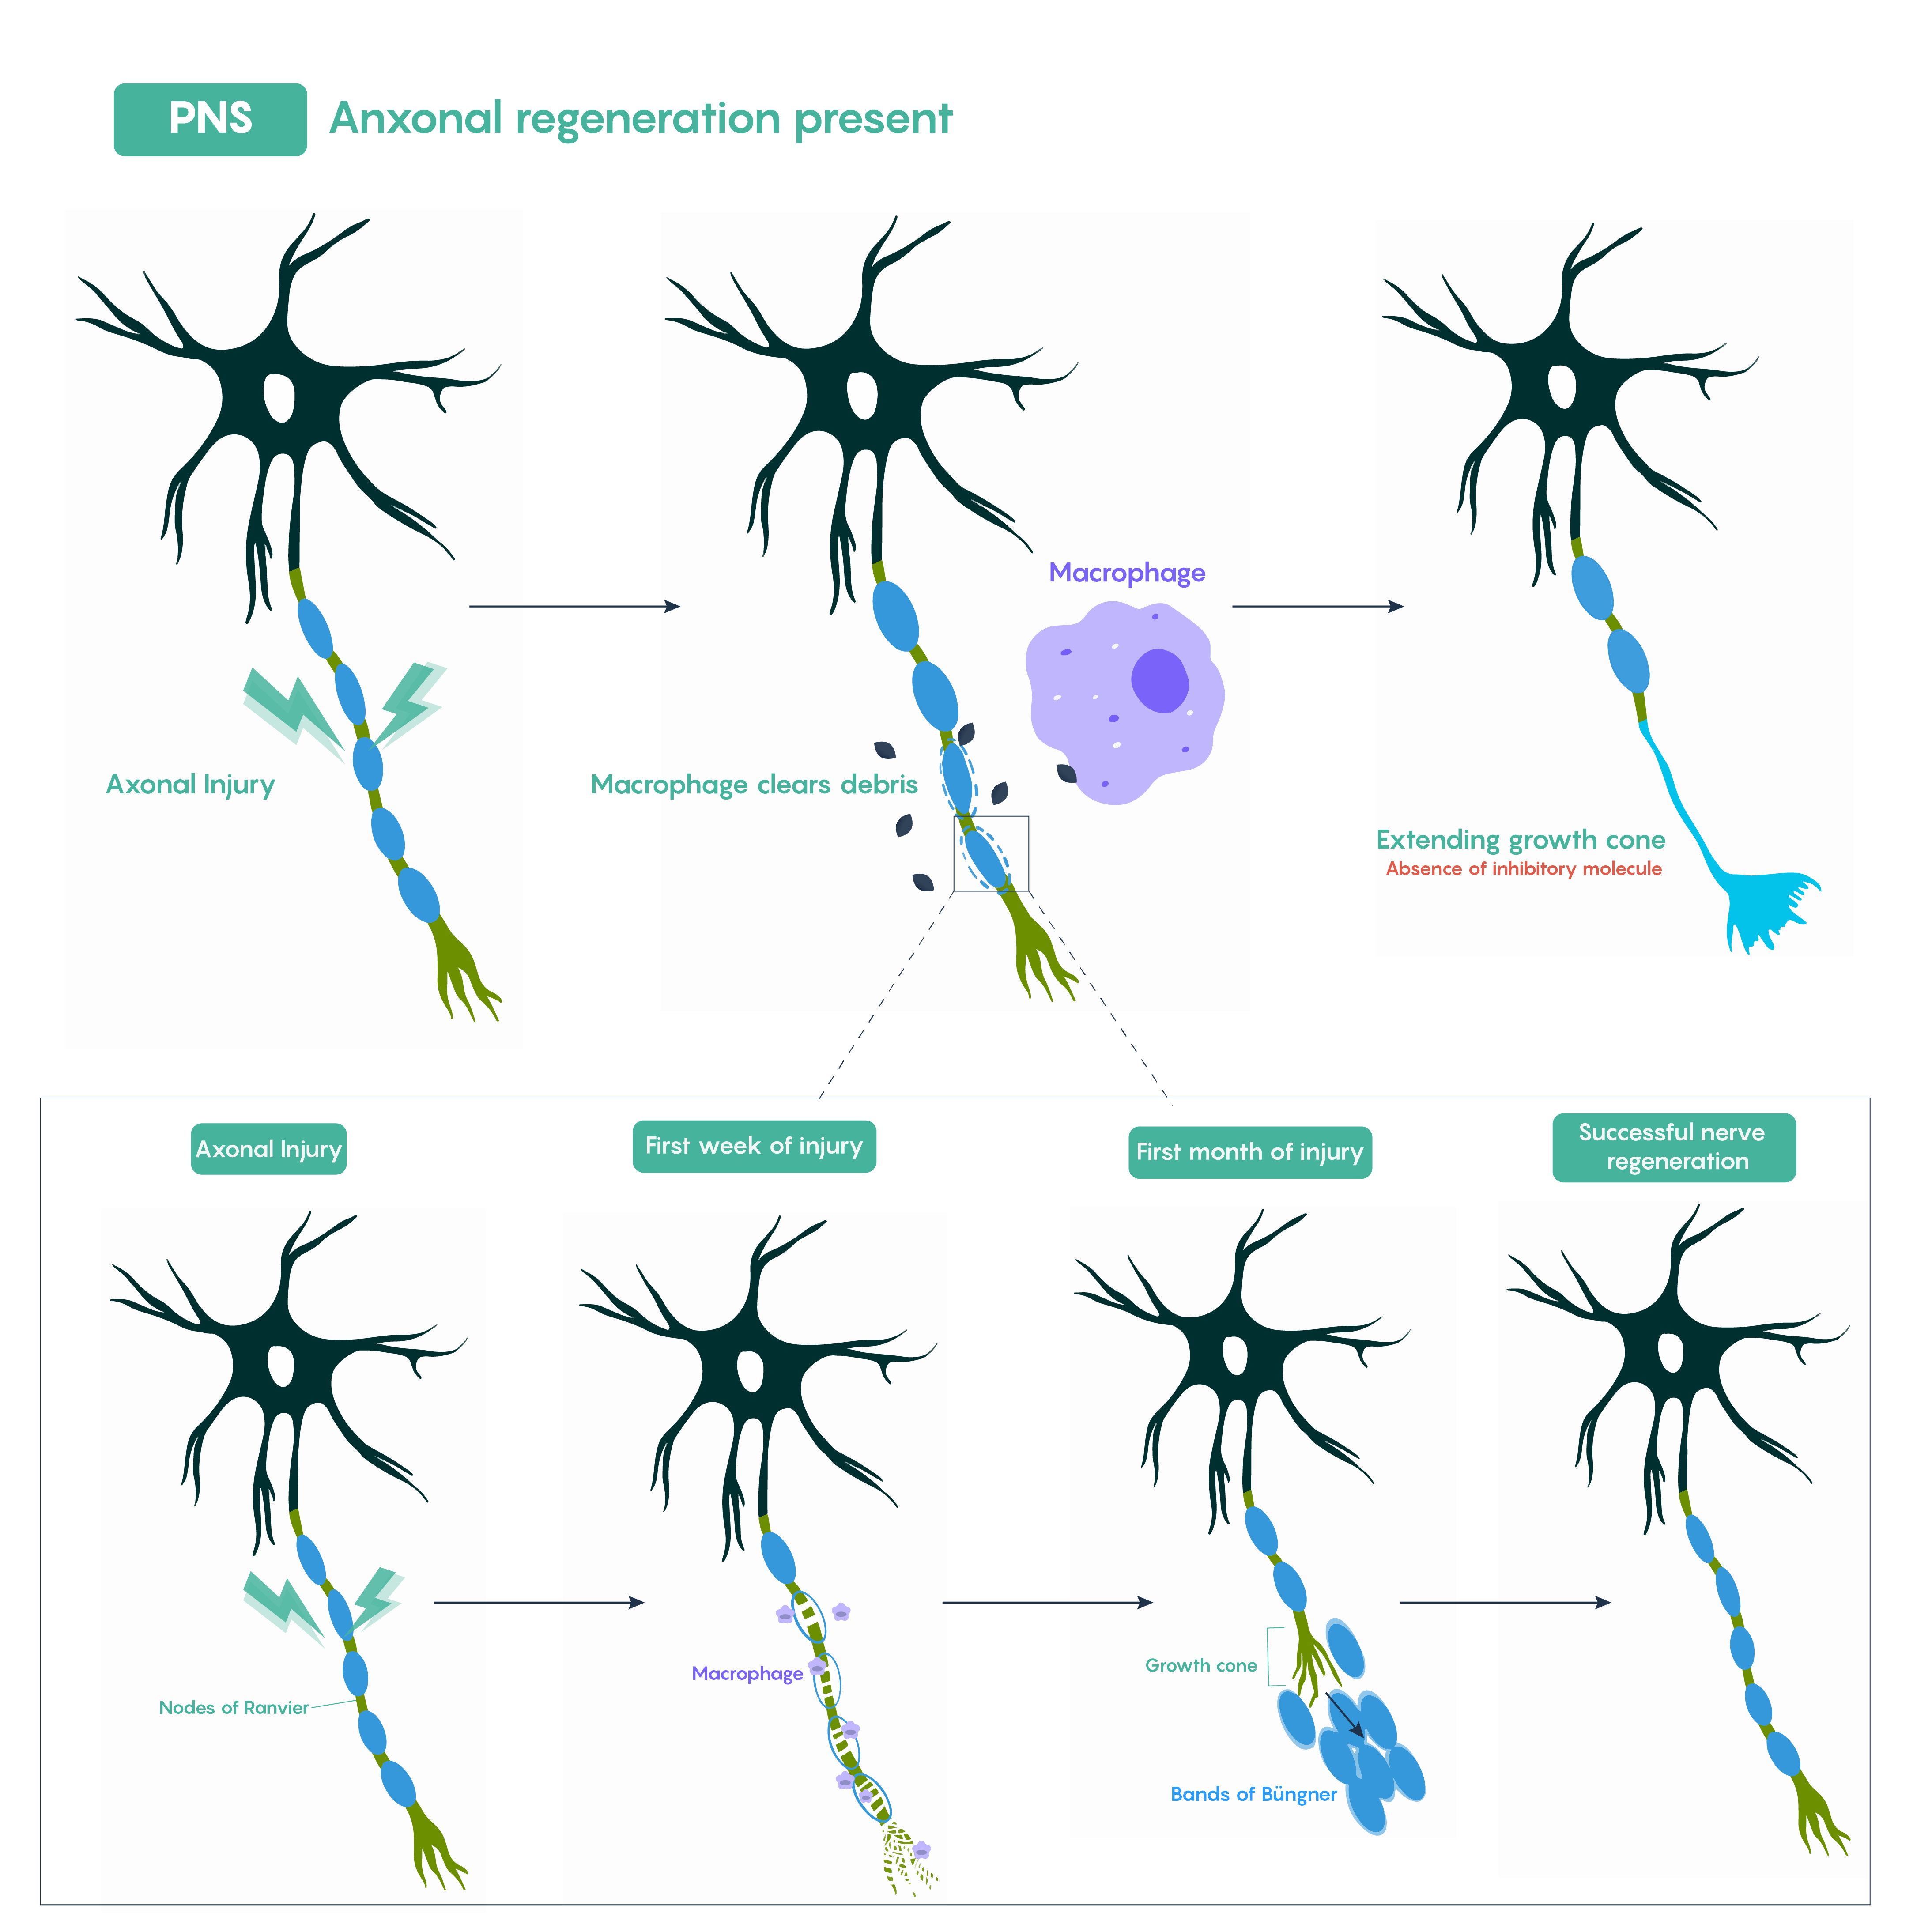 Image shows axonal regeneration in the PNS, with a closeup on the exact steps.